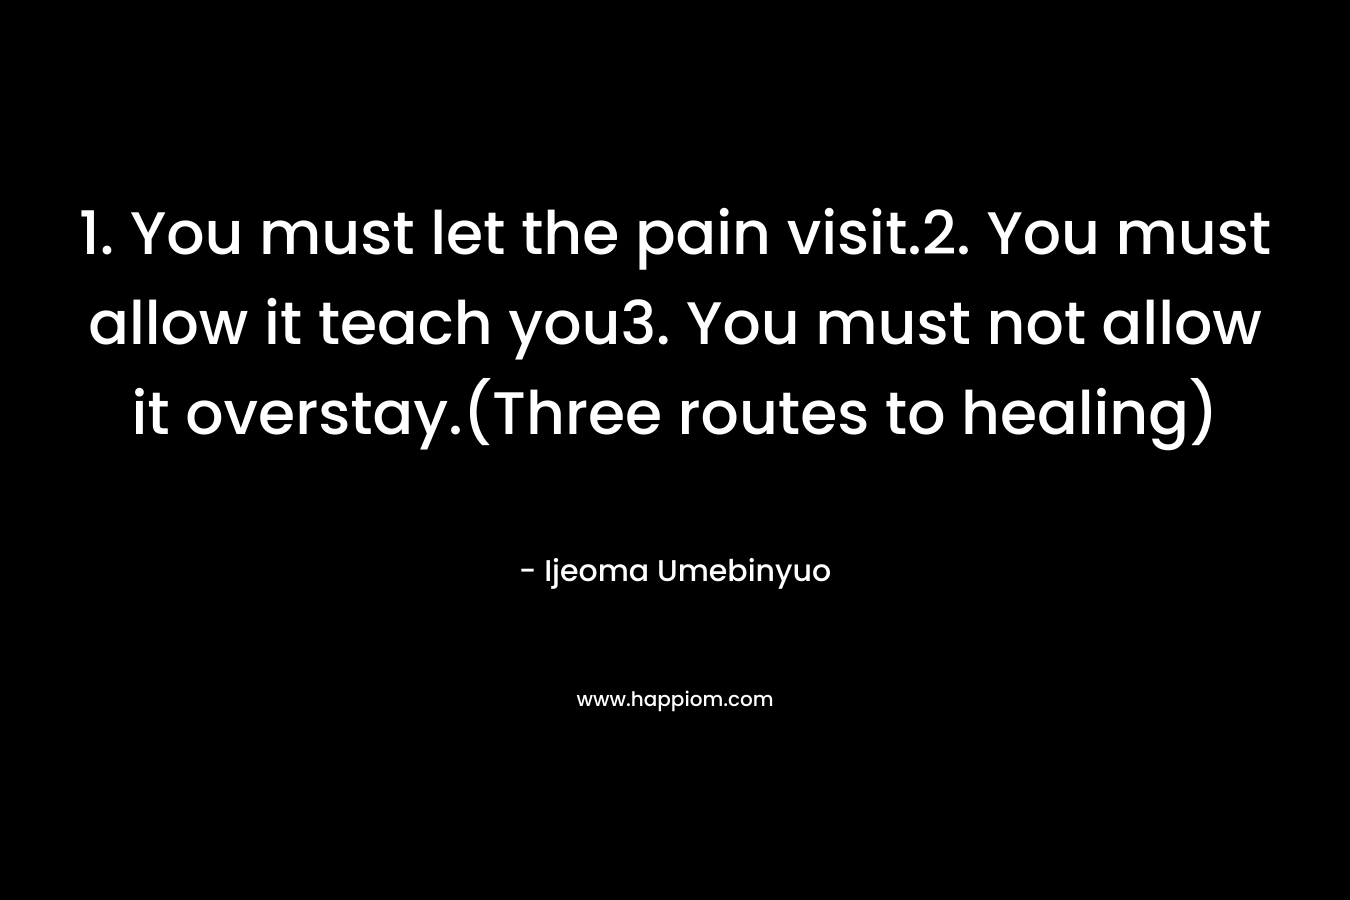 1. You must let the pain visit.2. You must allow it teach you3. You must not allow it overstay.(Three routes to healing) – Ijeoma Umebinyuo